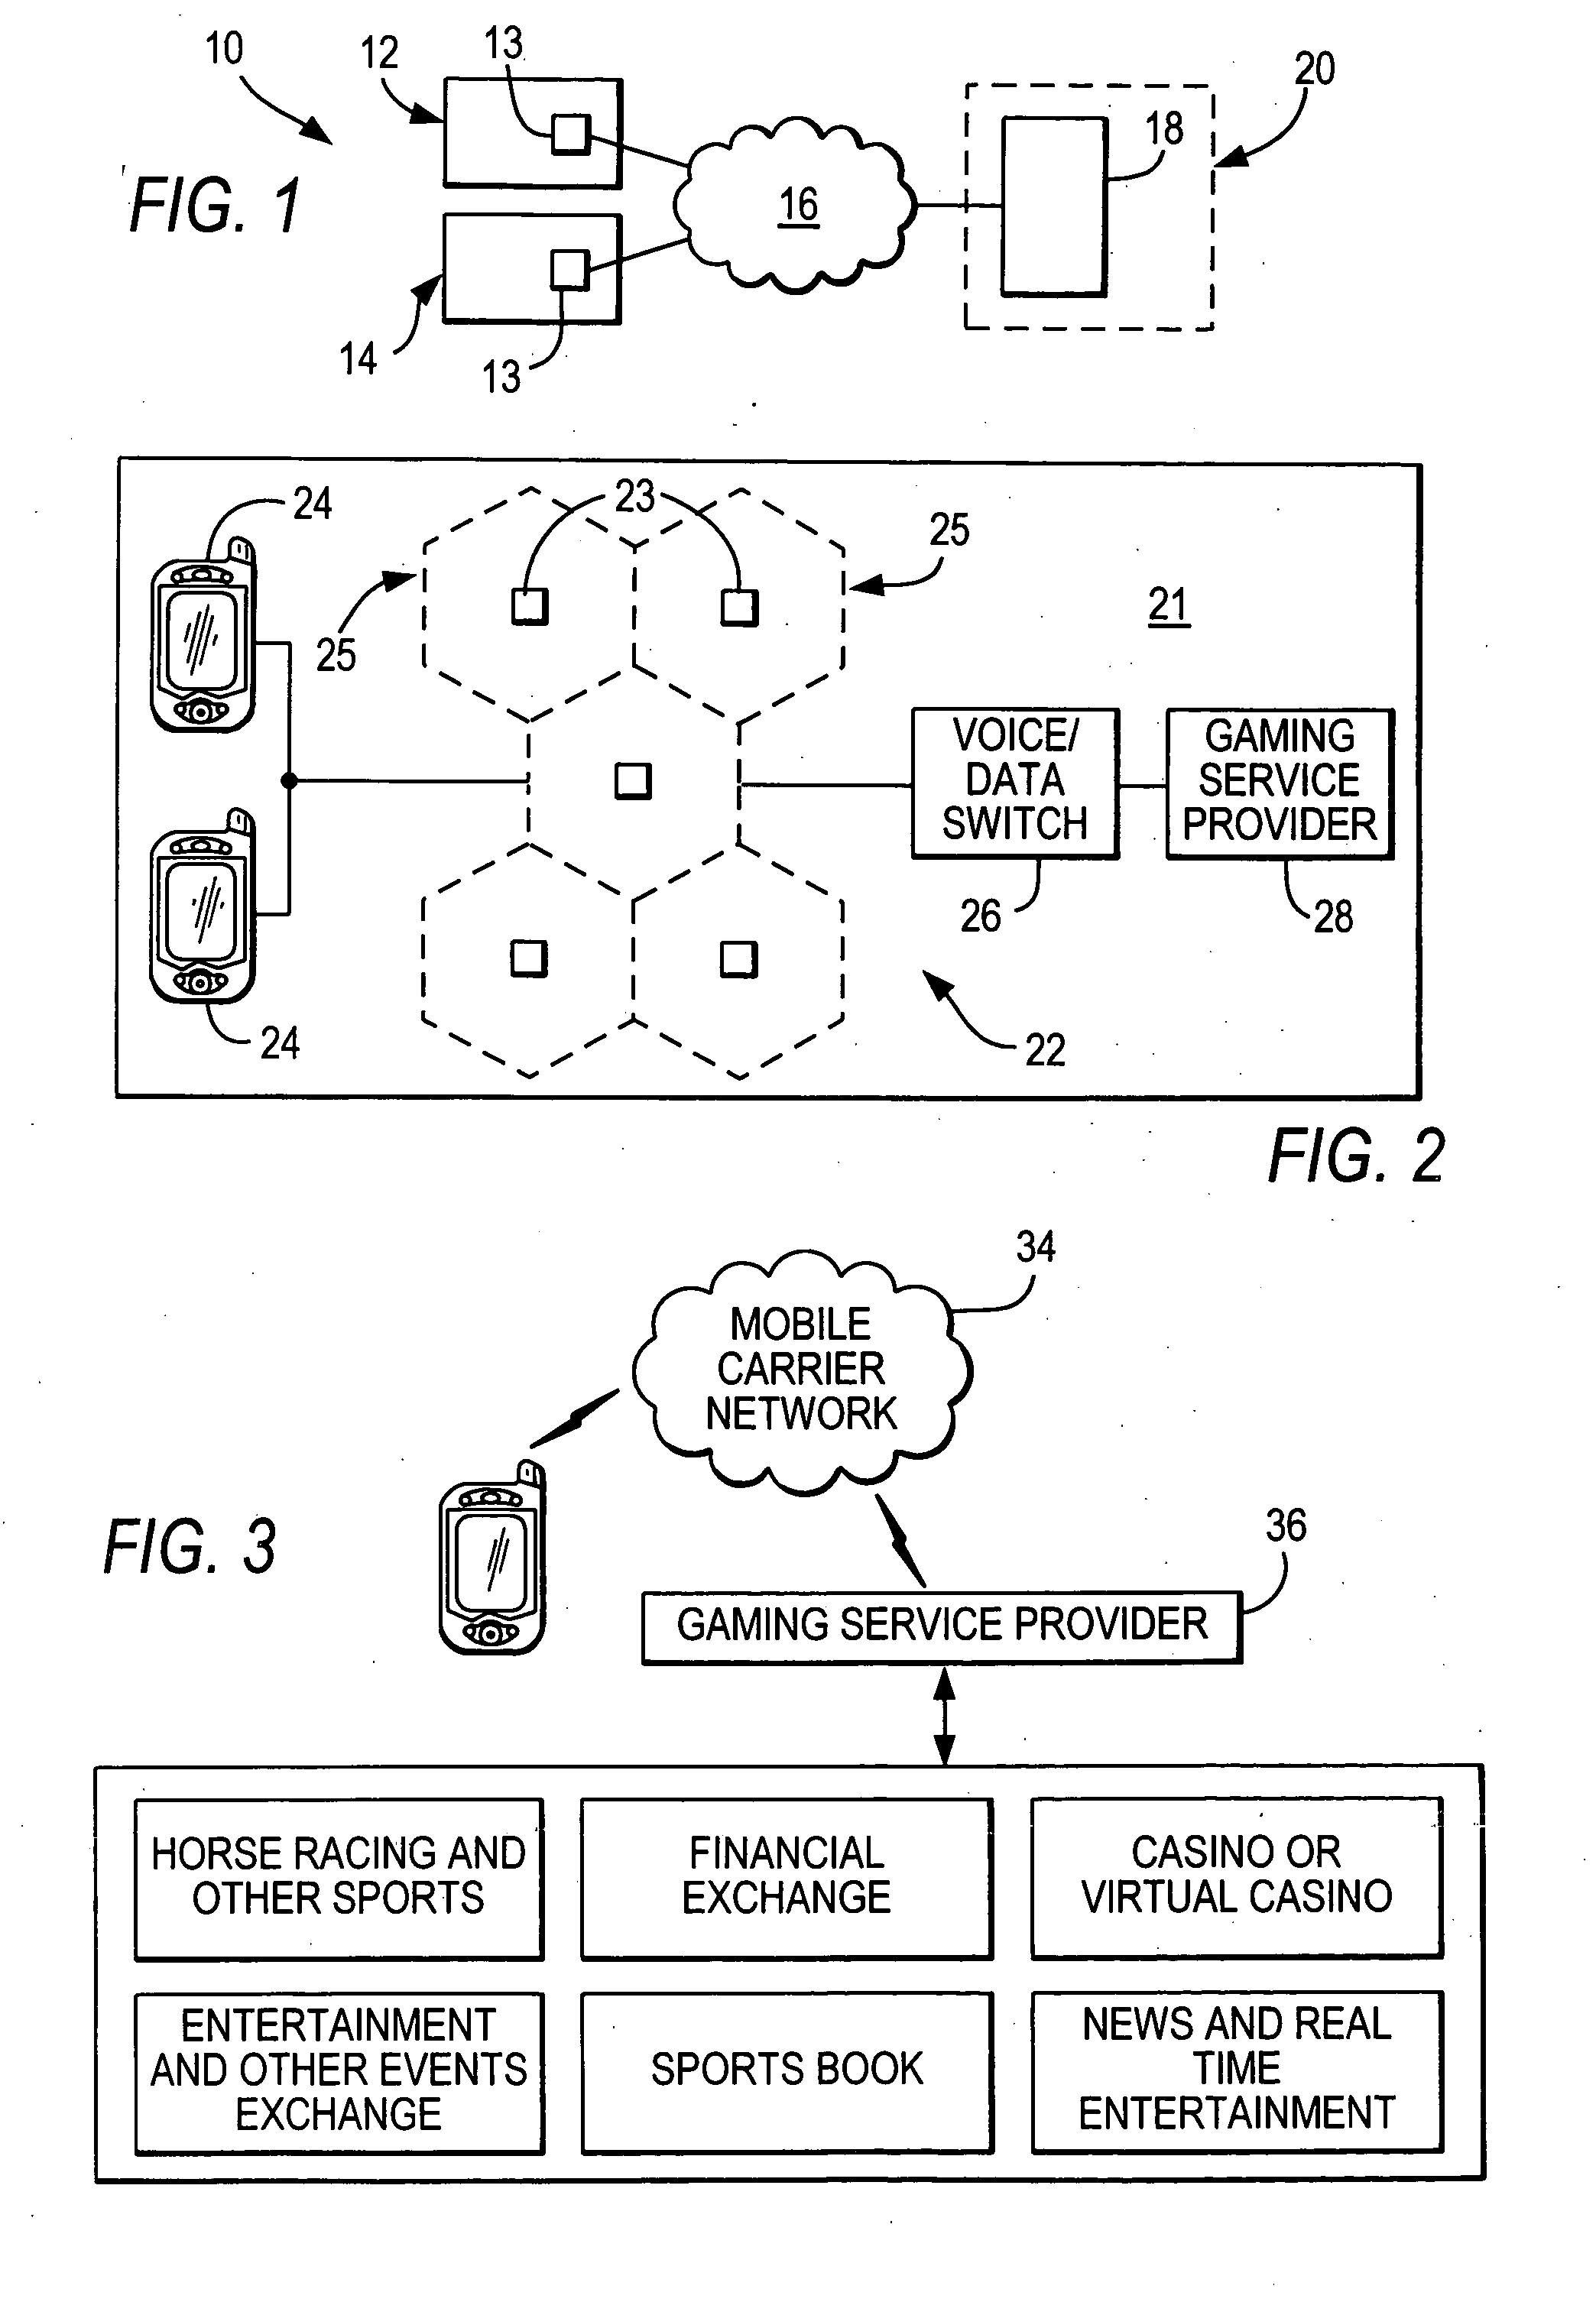 Systems and methods for providing access to wireless gaming devices